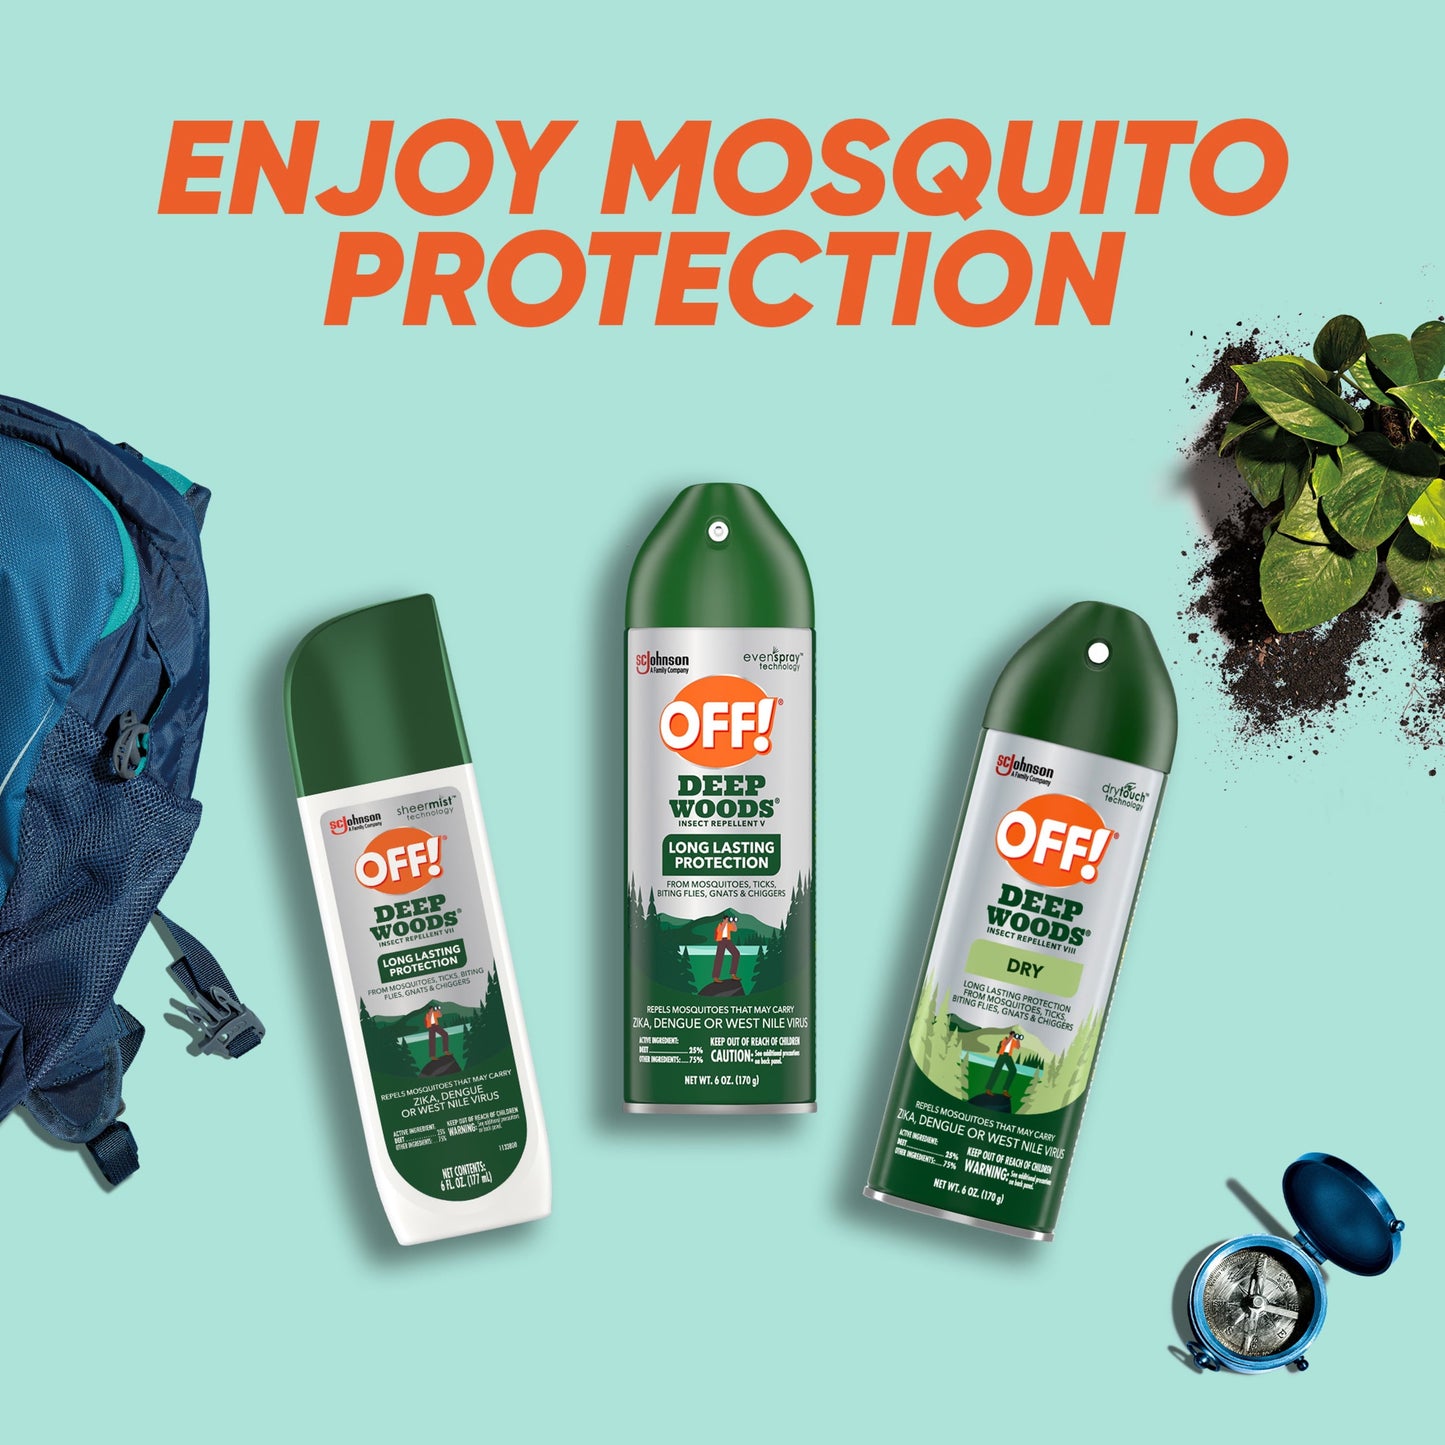 OFF! Deep Woods Mosquito Repellent V, Up to 8 Hours of Outdoor Insect Protection, 6 oz